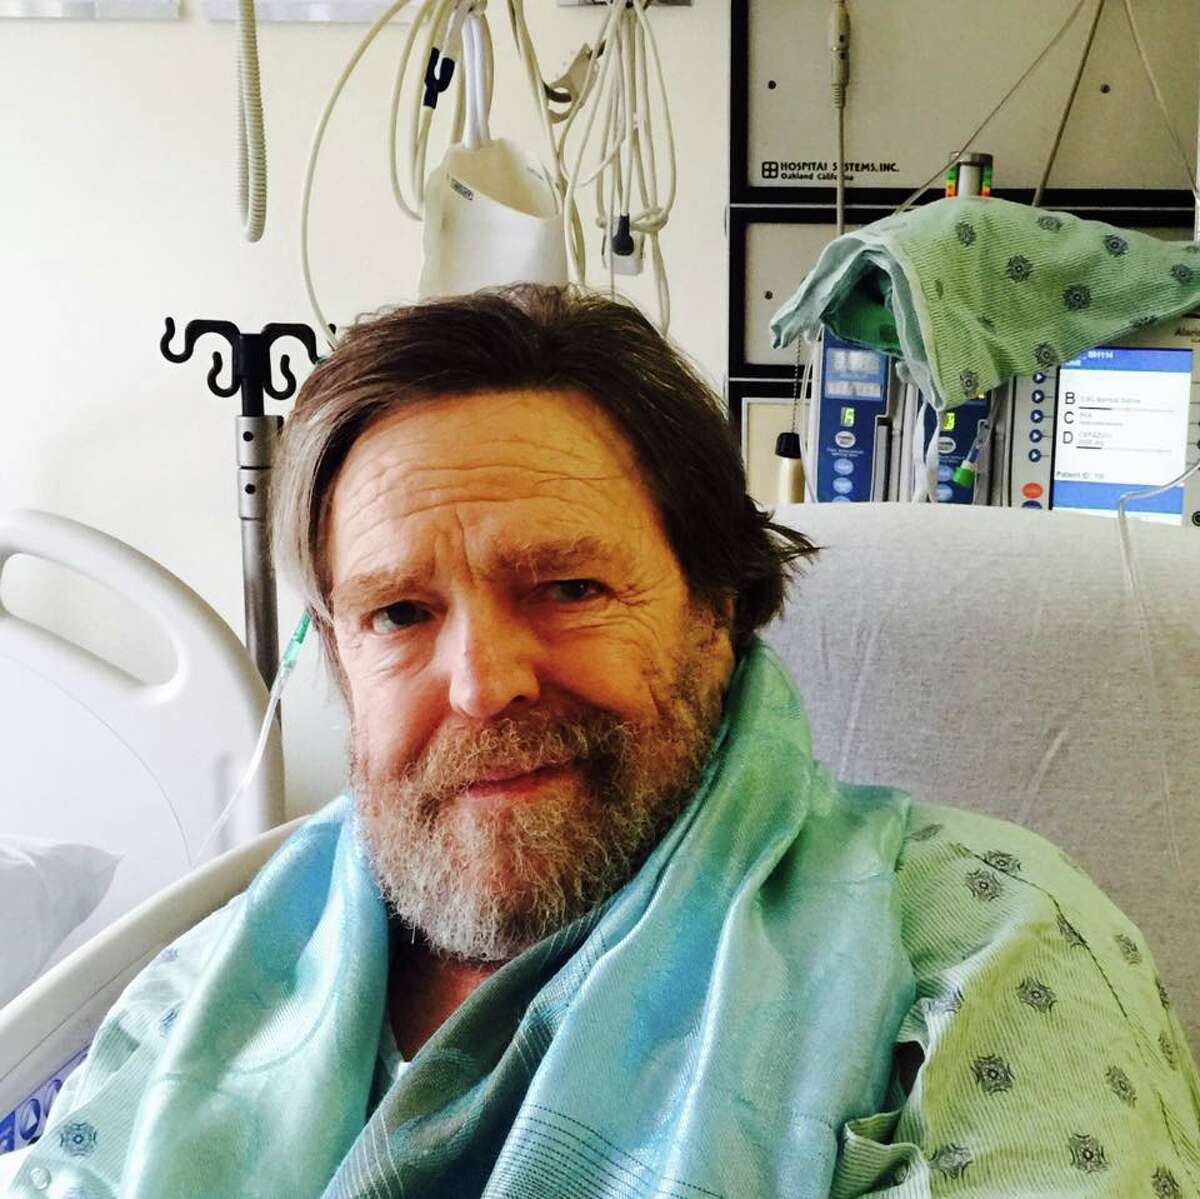 John Perry Barlow, shortly after a heart attack in 2015. Photo via his Twitter account.